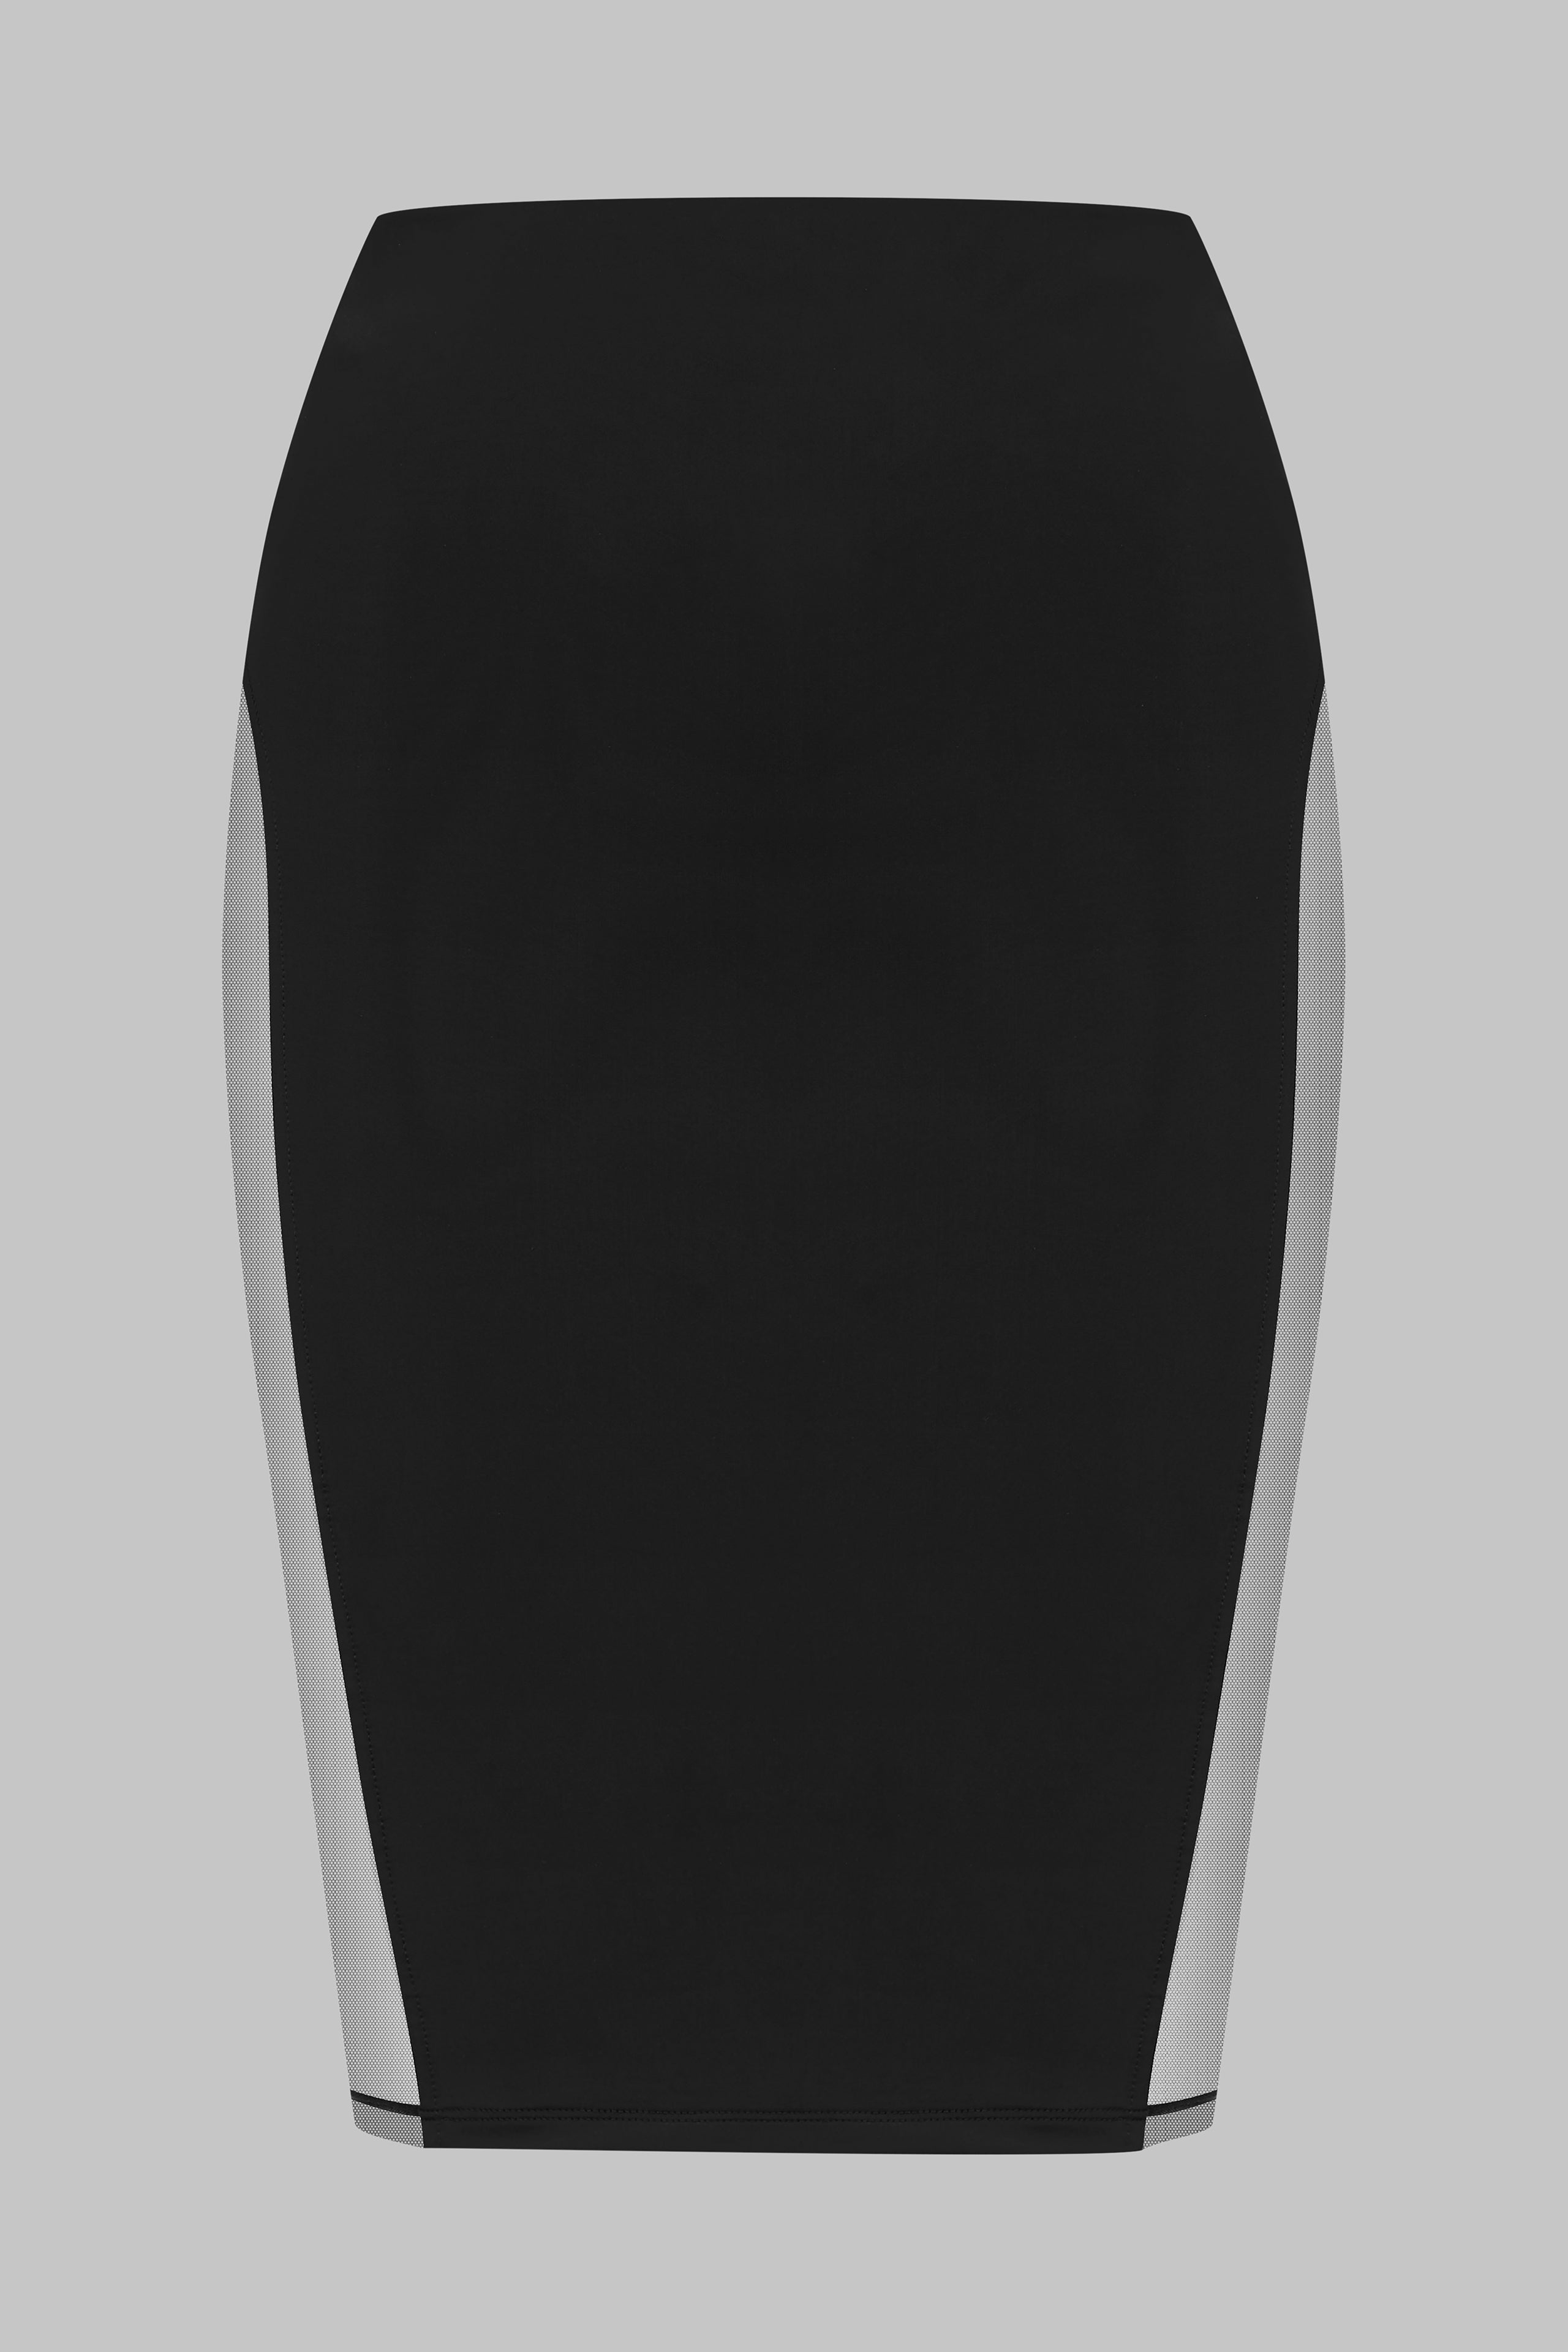 008 - Stretch pencil skirt with sheer sides